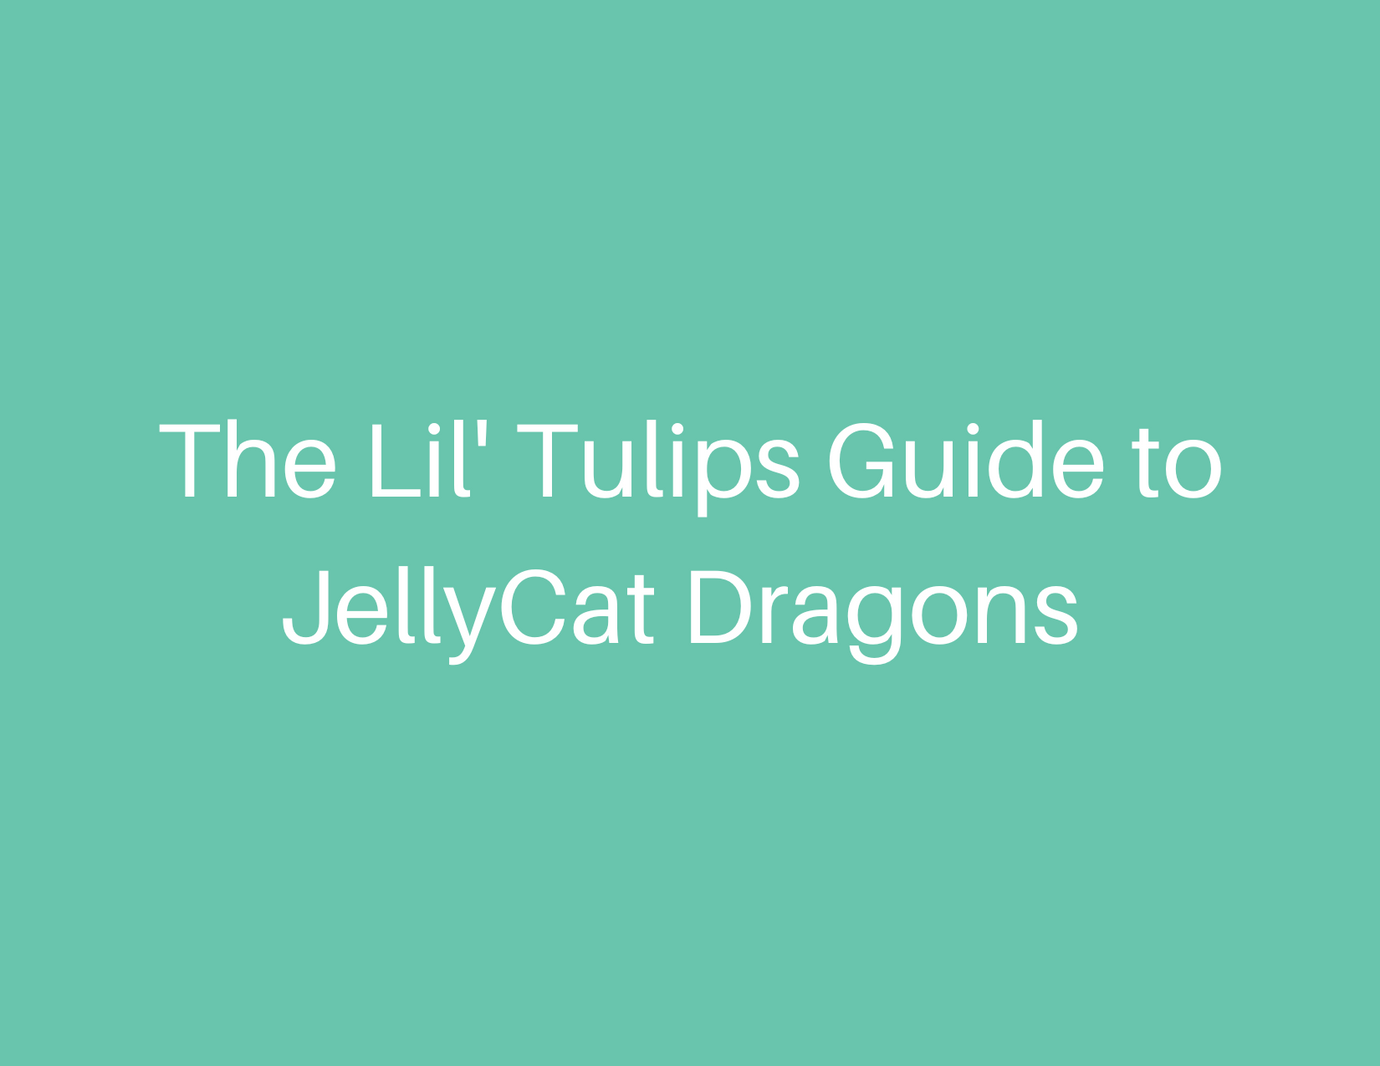 The Lil' Tulips Guide to Jellycat Dragon Stuffed Animals